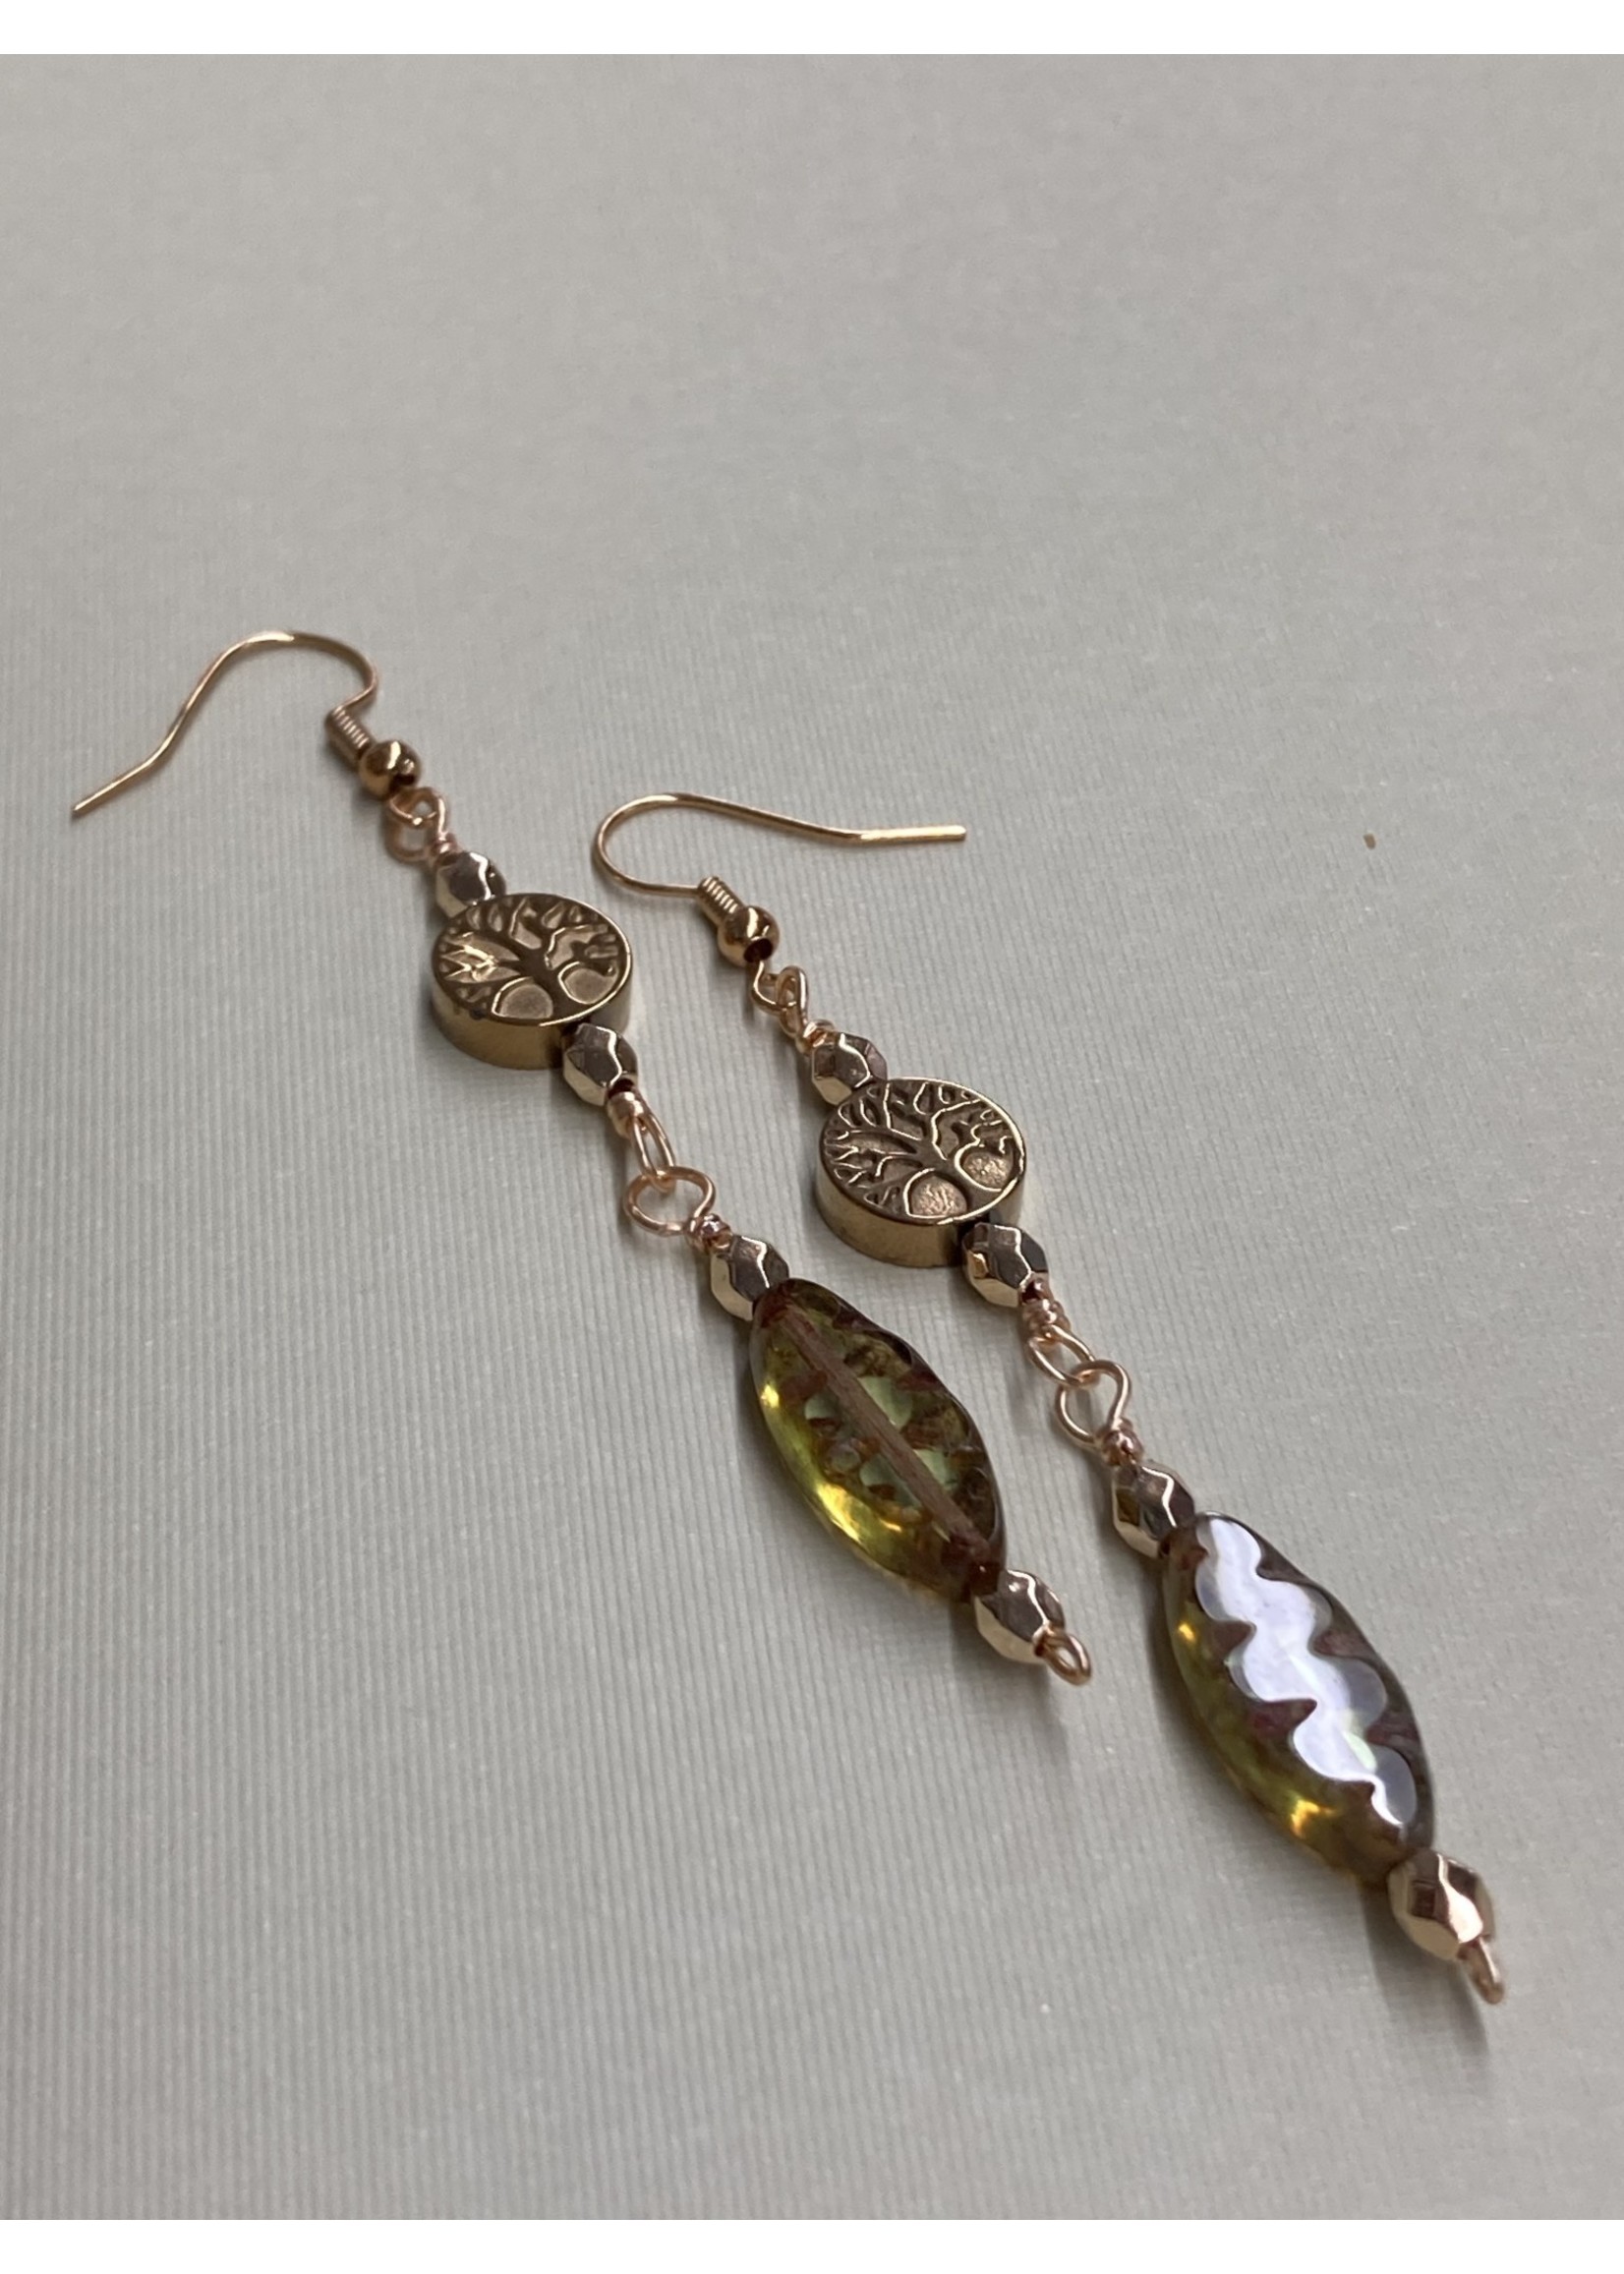 Our Twisted Dahlia E028 Gold Tree Of Life Bead with Celadon Green Czech Glass Earrings